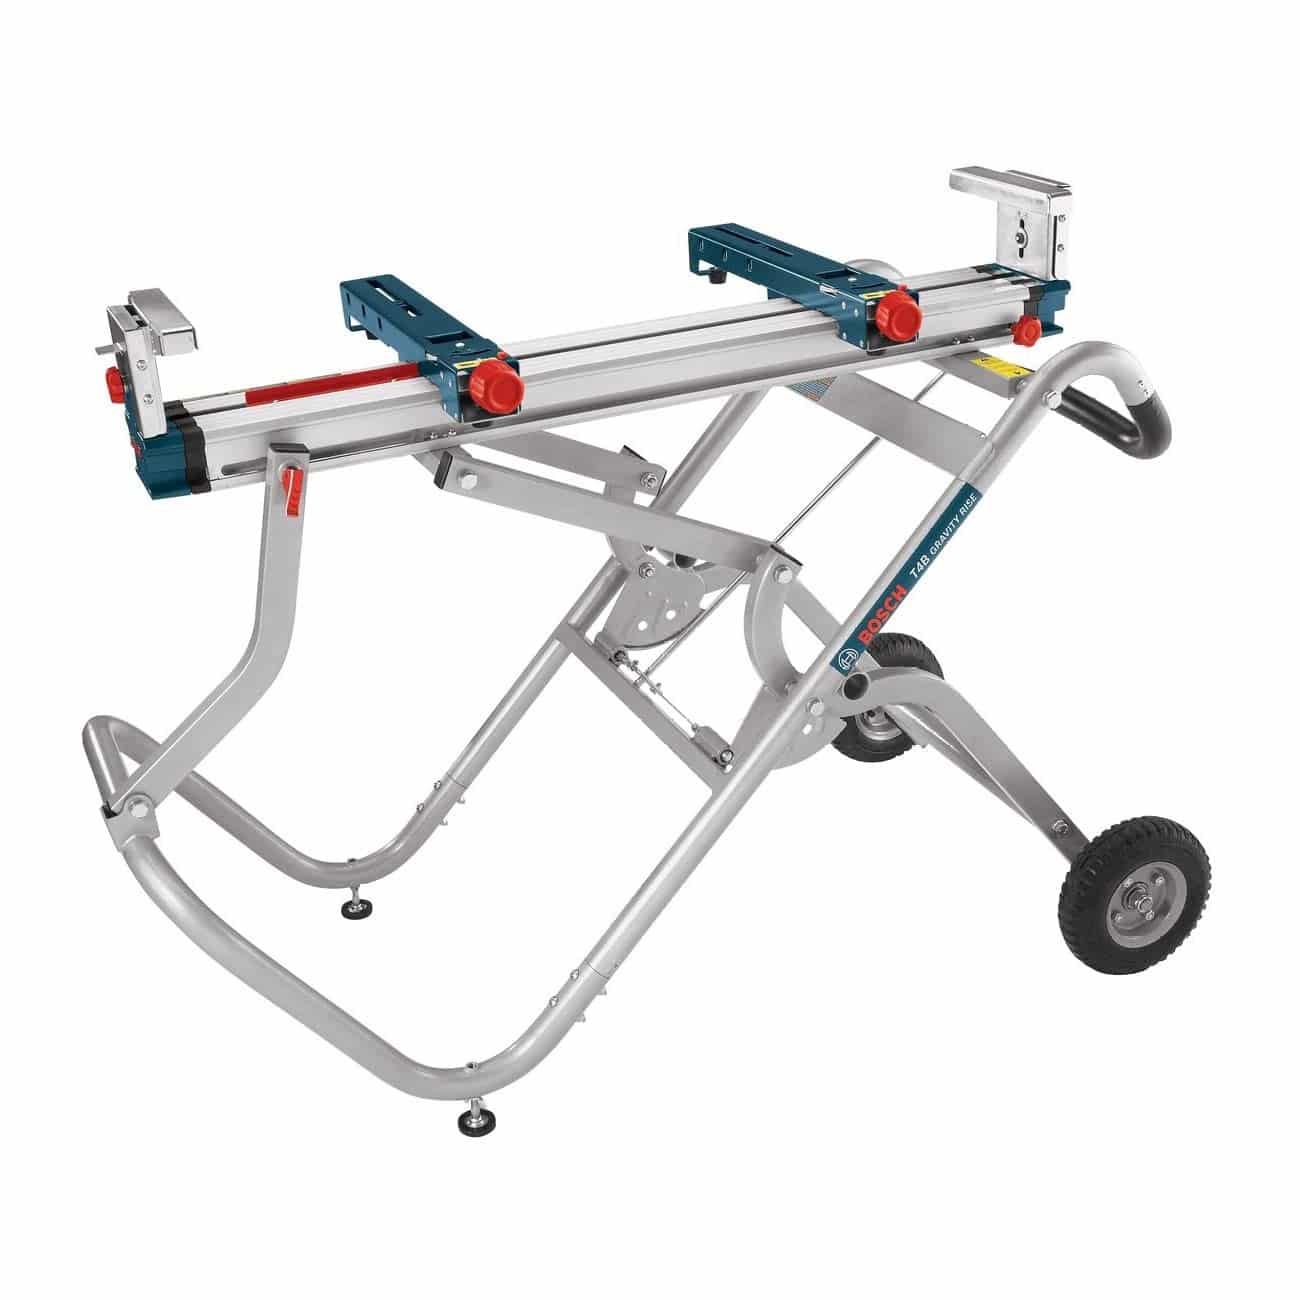 BOSCH T4B Portable Gravity-Rise Wheeled Miter Saw Stand